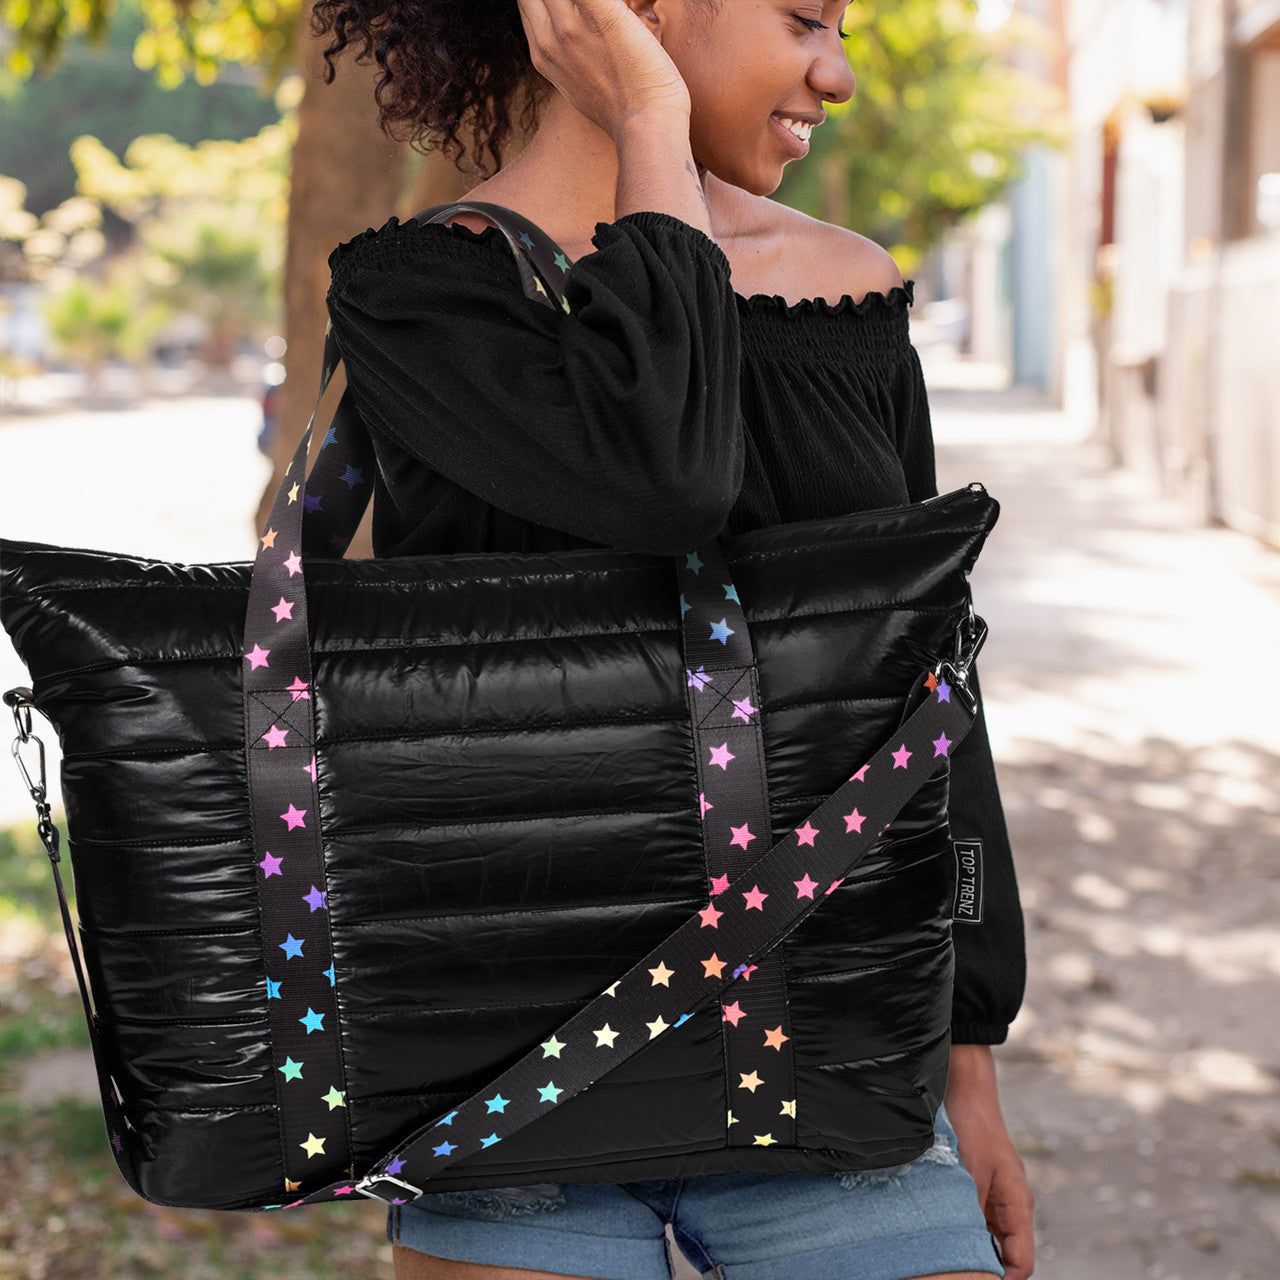 Black Puffer Tote with Scatter Star Strap